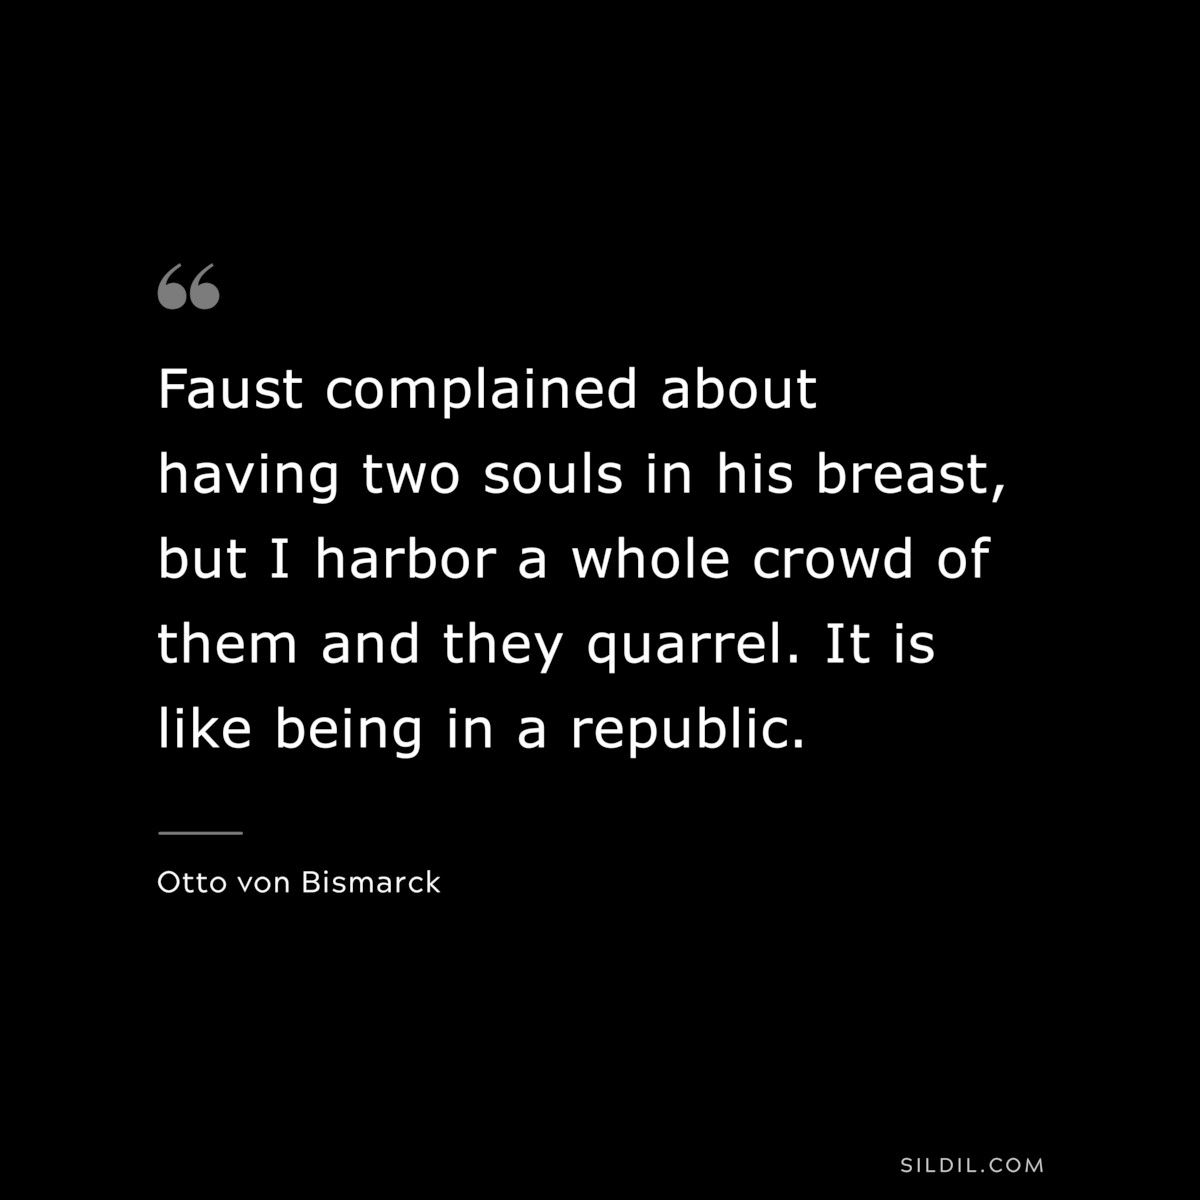 Faust complained about having two souls in his breast, but I harbor a whole crowd of them and they quarrel. It is like being in a republic. ― Otto von Bismarck